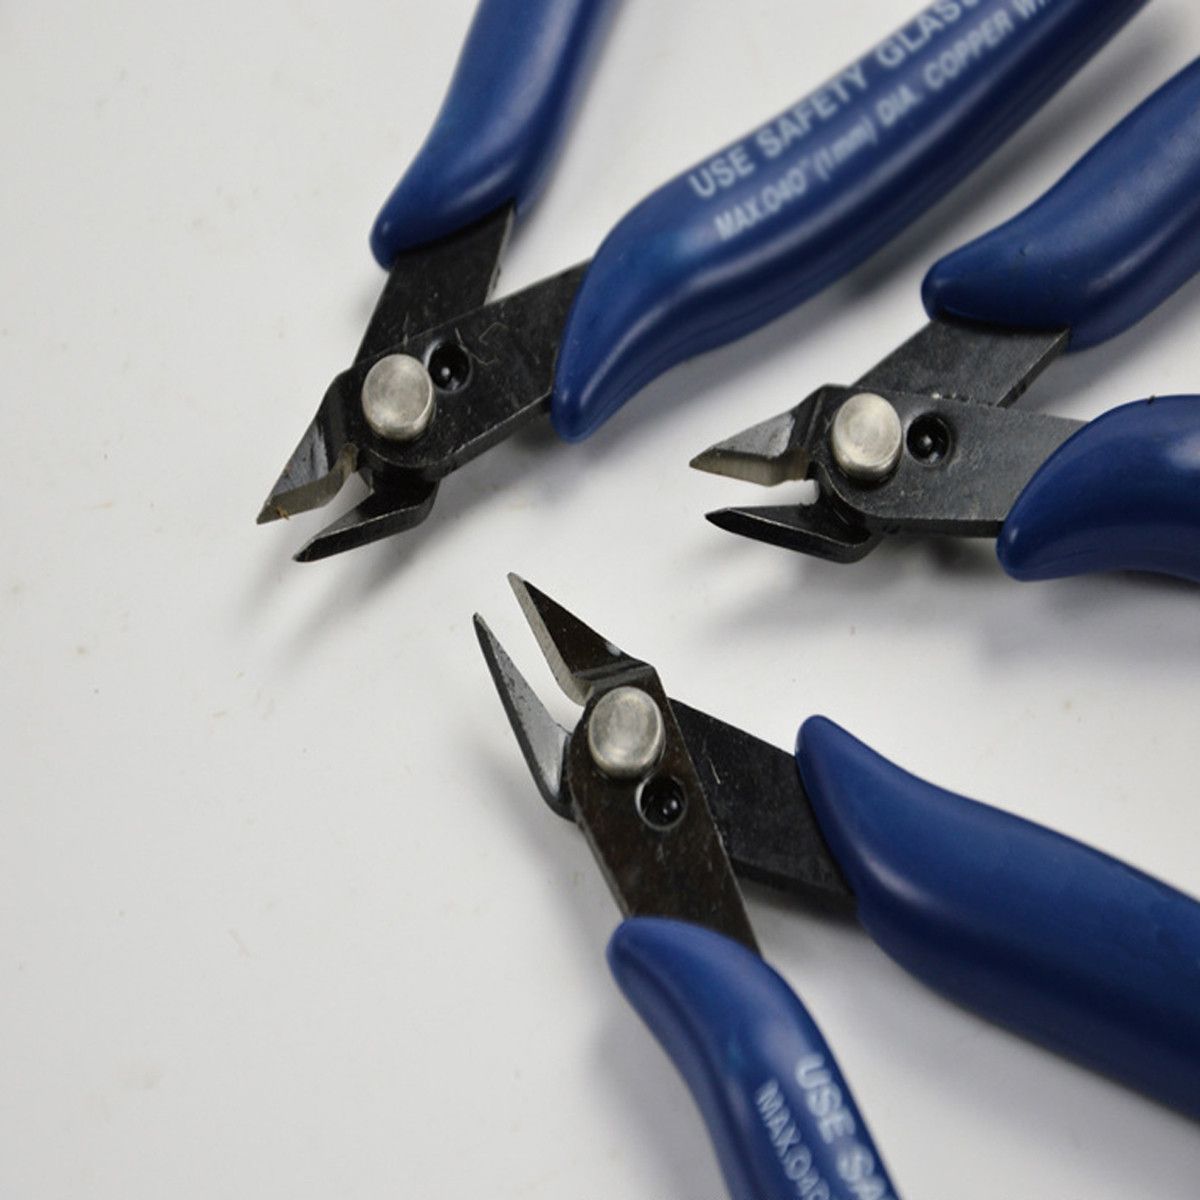 DANIU-Electrical-Cutting-Plier-Wire-Cable-Cutter-Side-Snips-Flush-Pliers-Tool-1046482